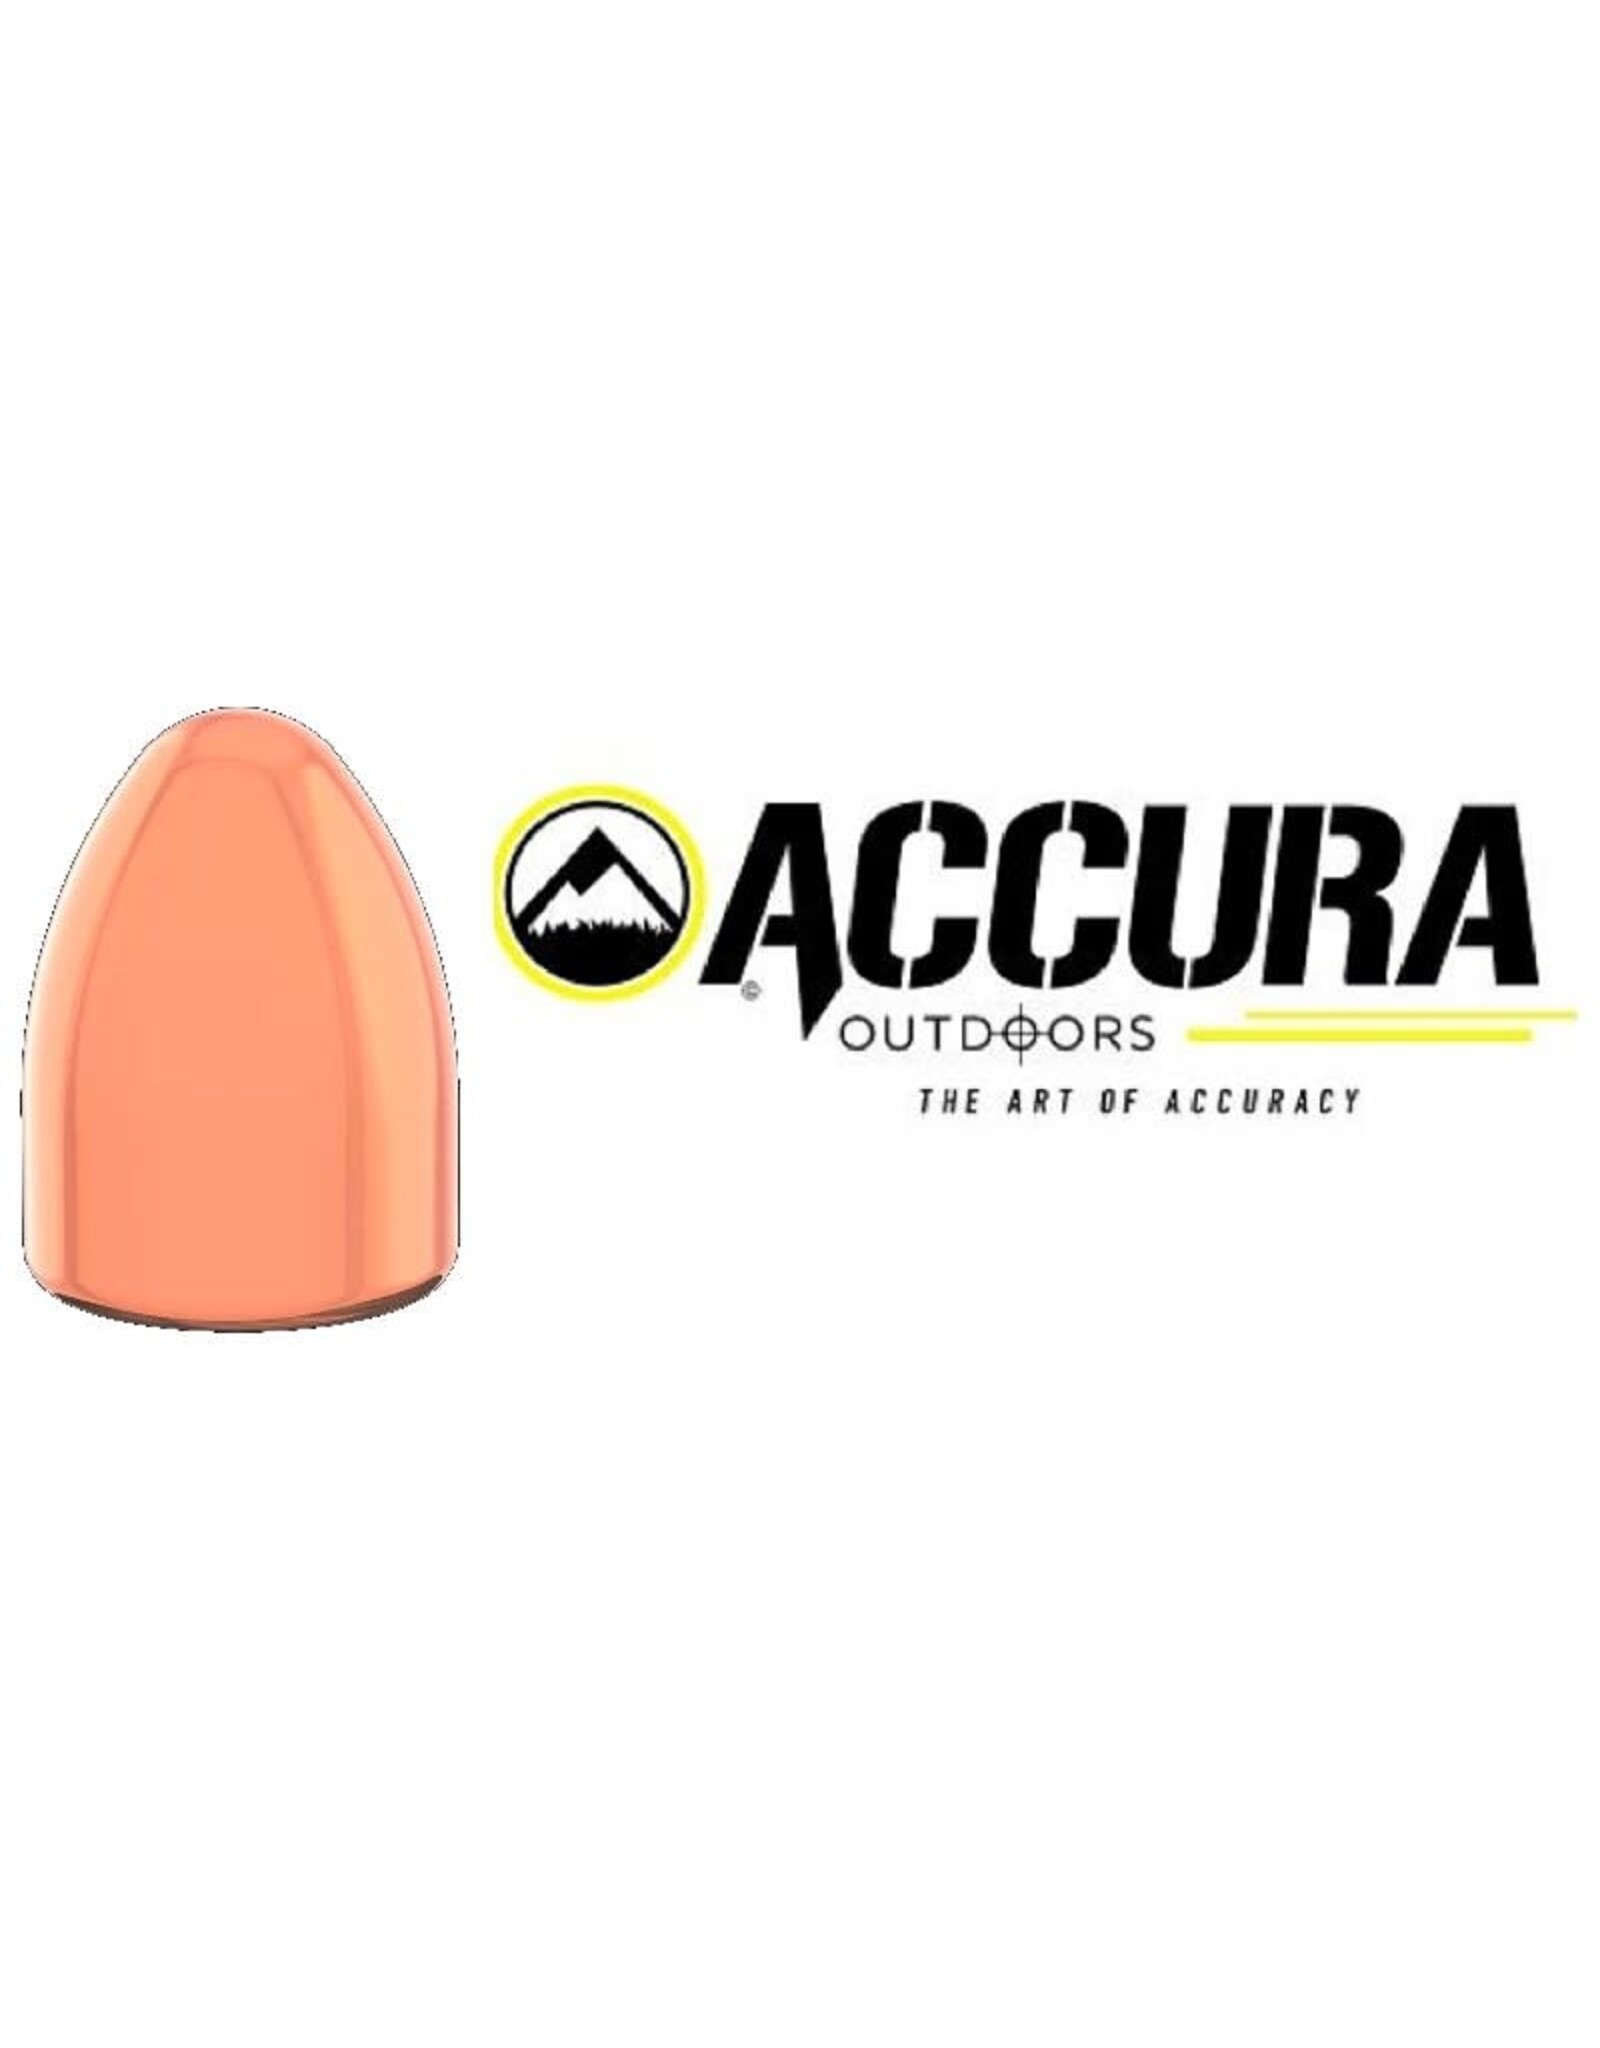 Accura Accura Bullets .380 Cal 100 GR Round Nose (.355") - 500 Count